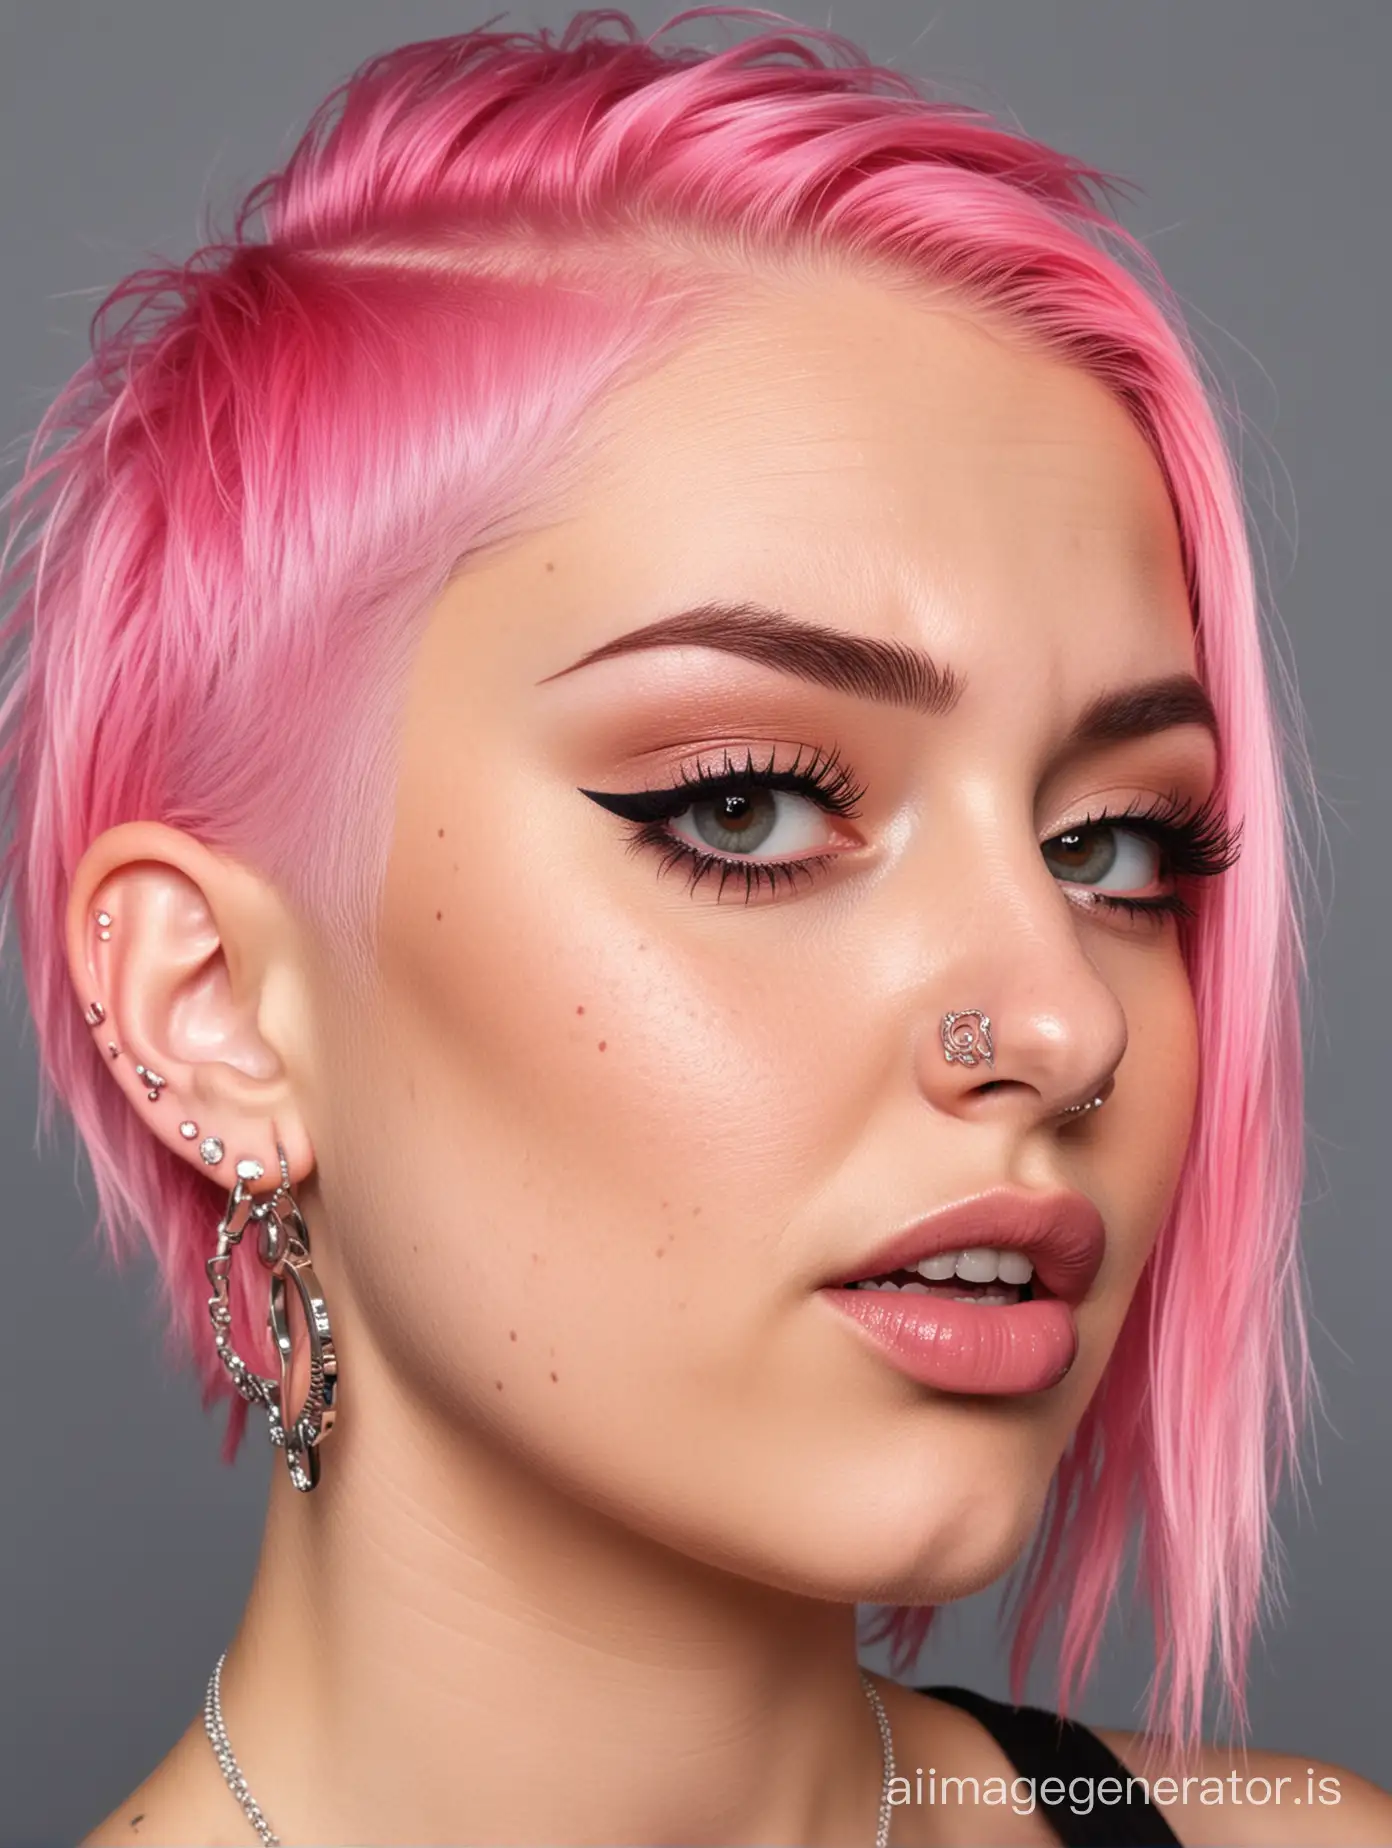 woman with shaved 360 degree undercut pink hair, multiple ear piercings and nose ring and pierced eyebrow showing her tongue piercing